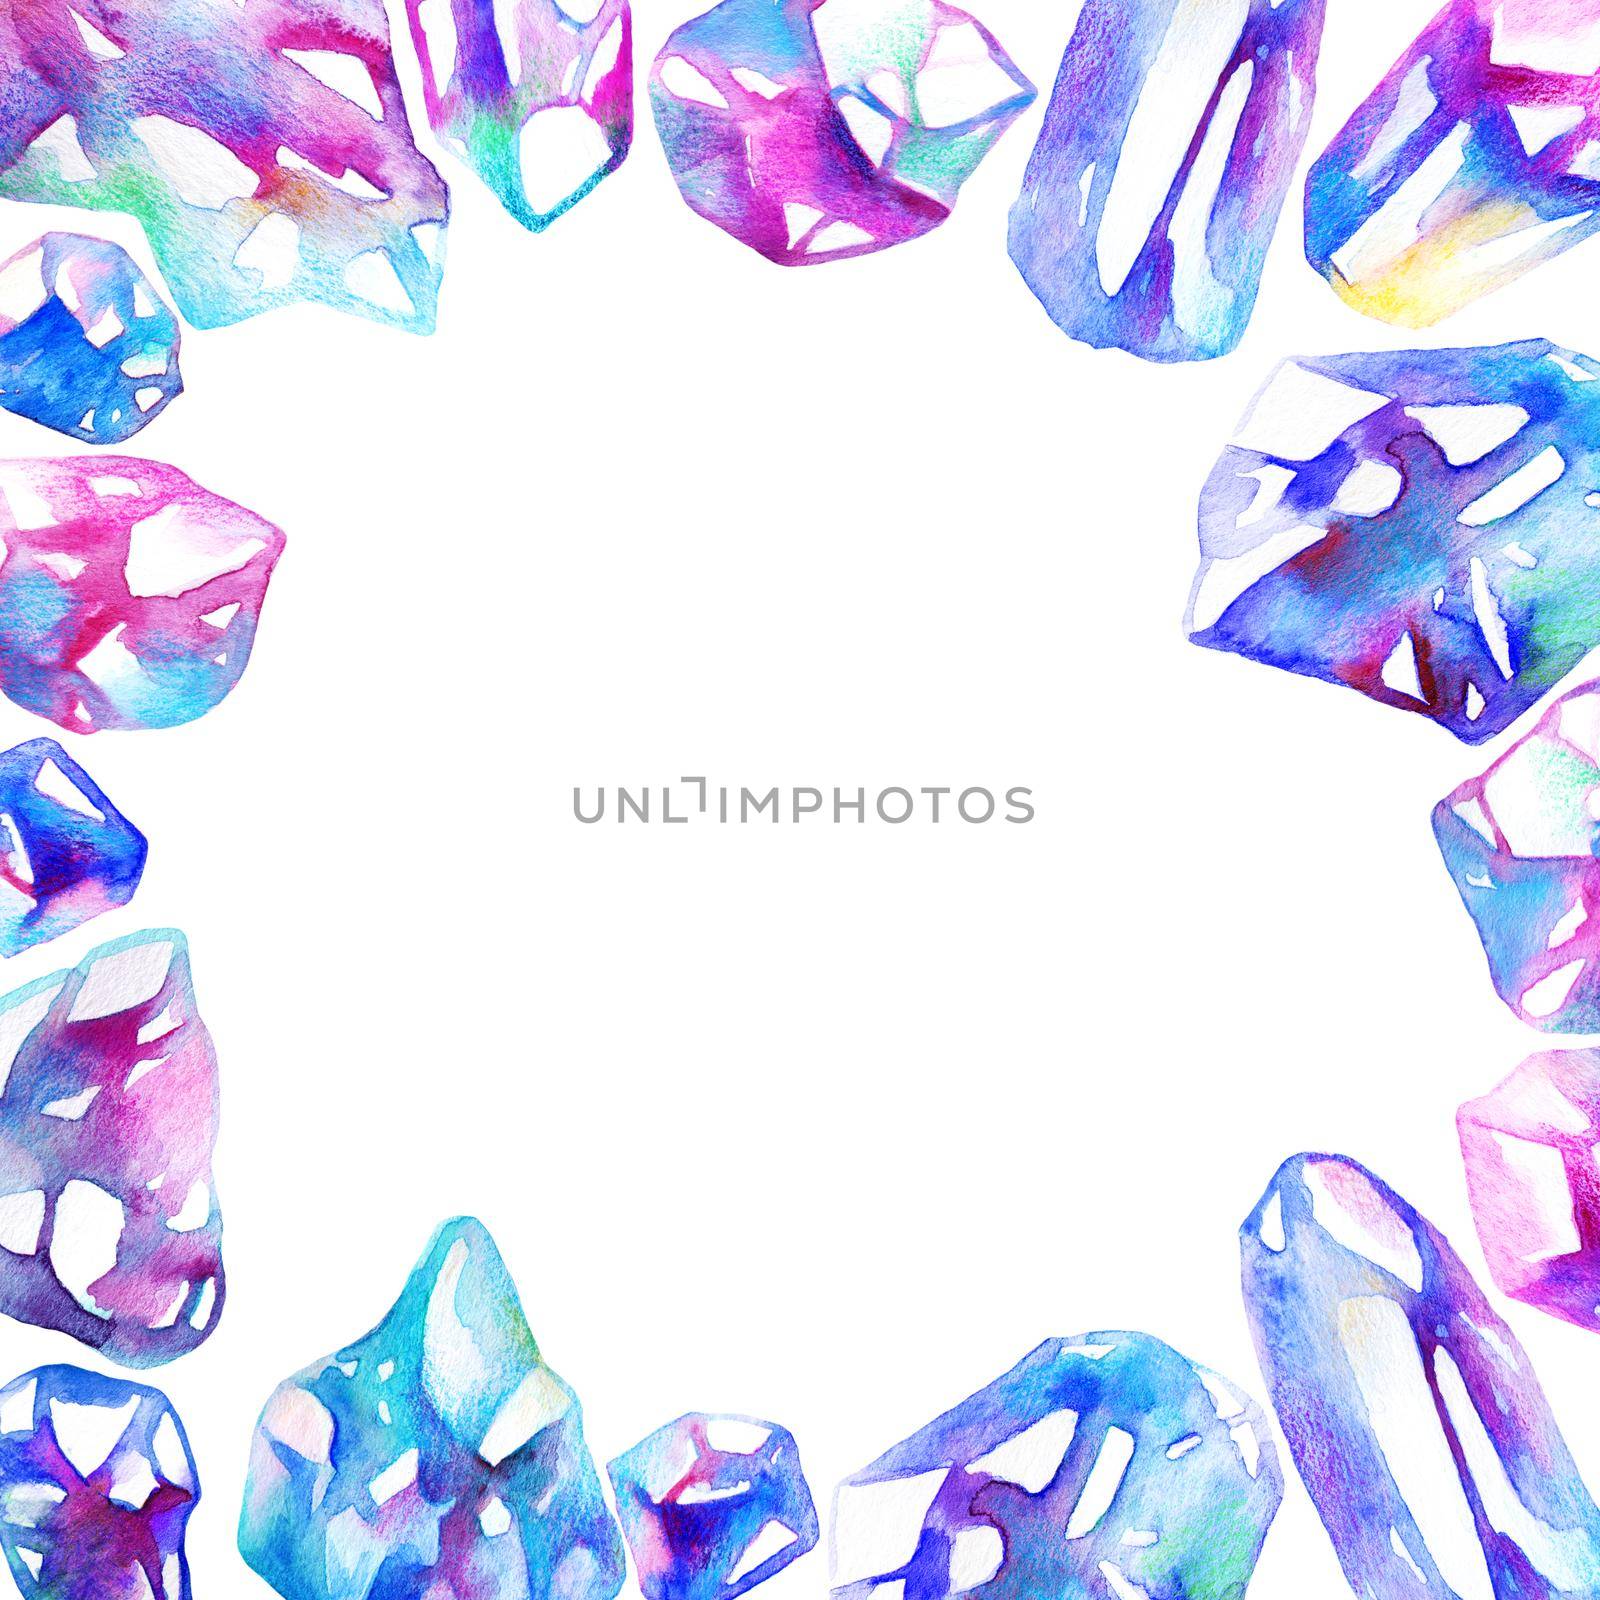 Hand drawn diamond crystals - background frame design with decorative watercolor drawings on white background